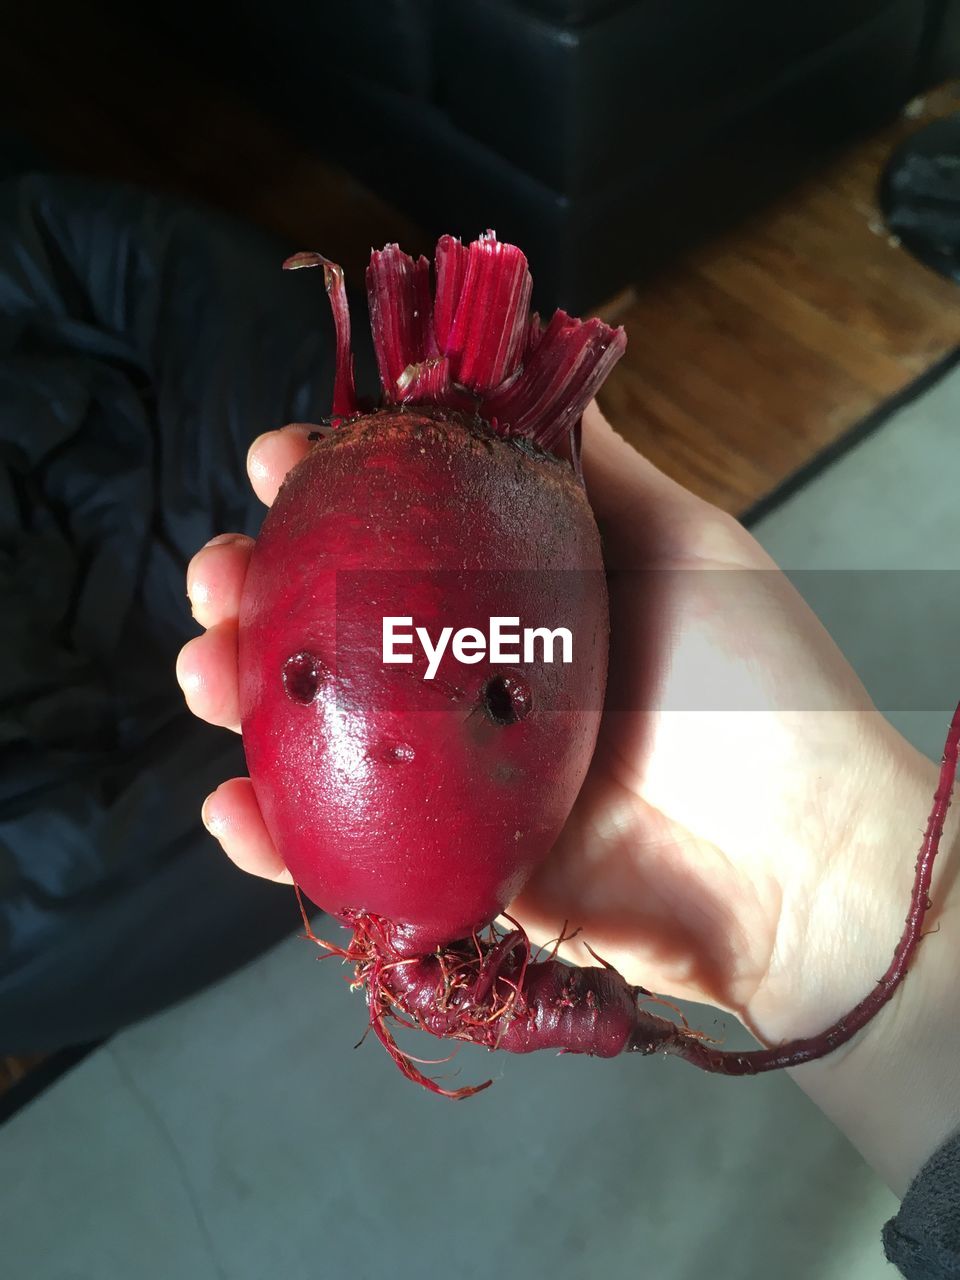 CLOSE-UP OF HAND HOLDING RED FRUIT